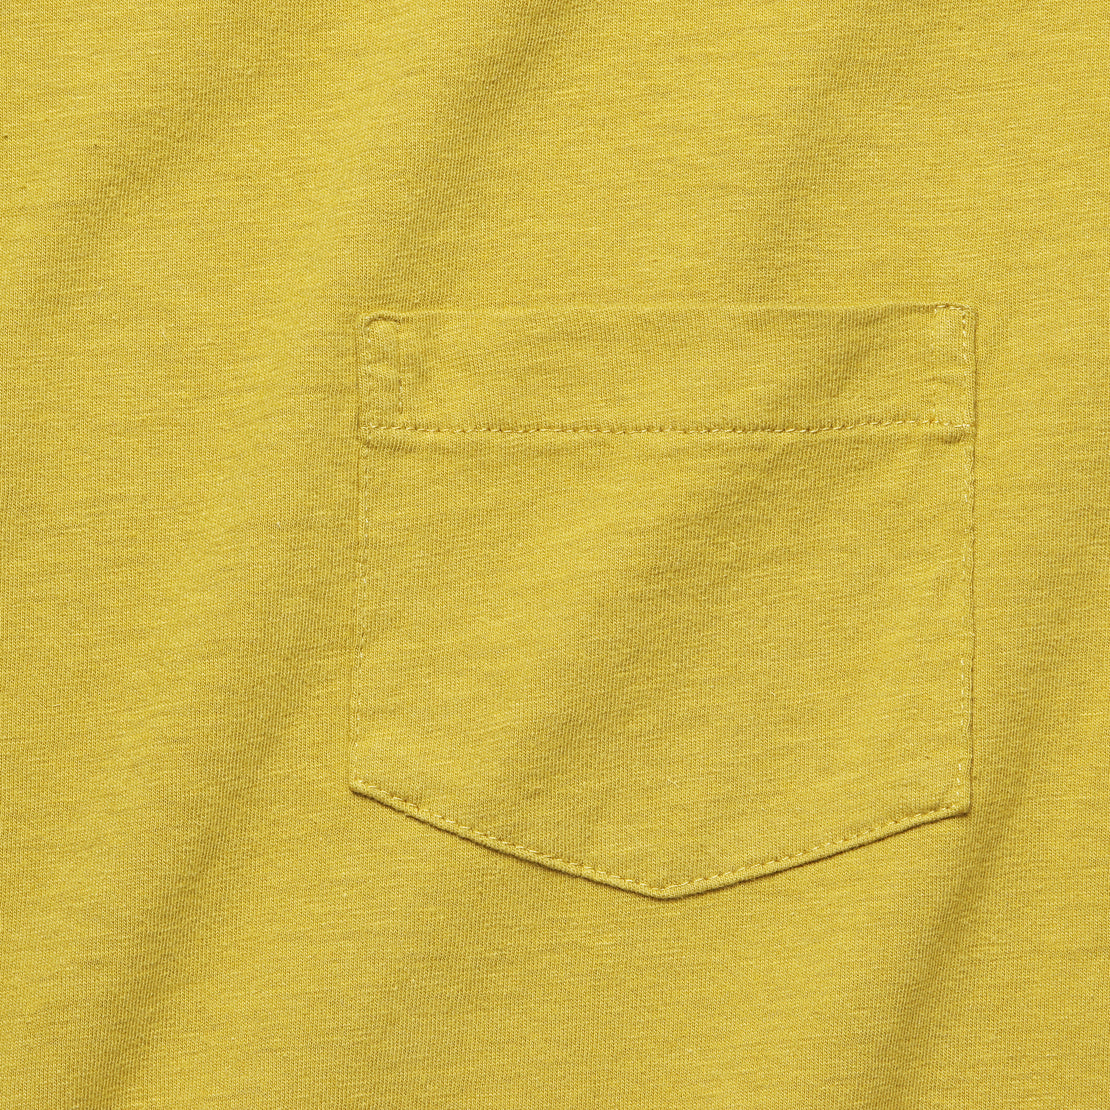 1950s Sportswear Tee - Misted Yellow - Levis Vintage Clothing - STAG Provisions - Tops - S/S Tee